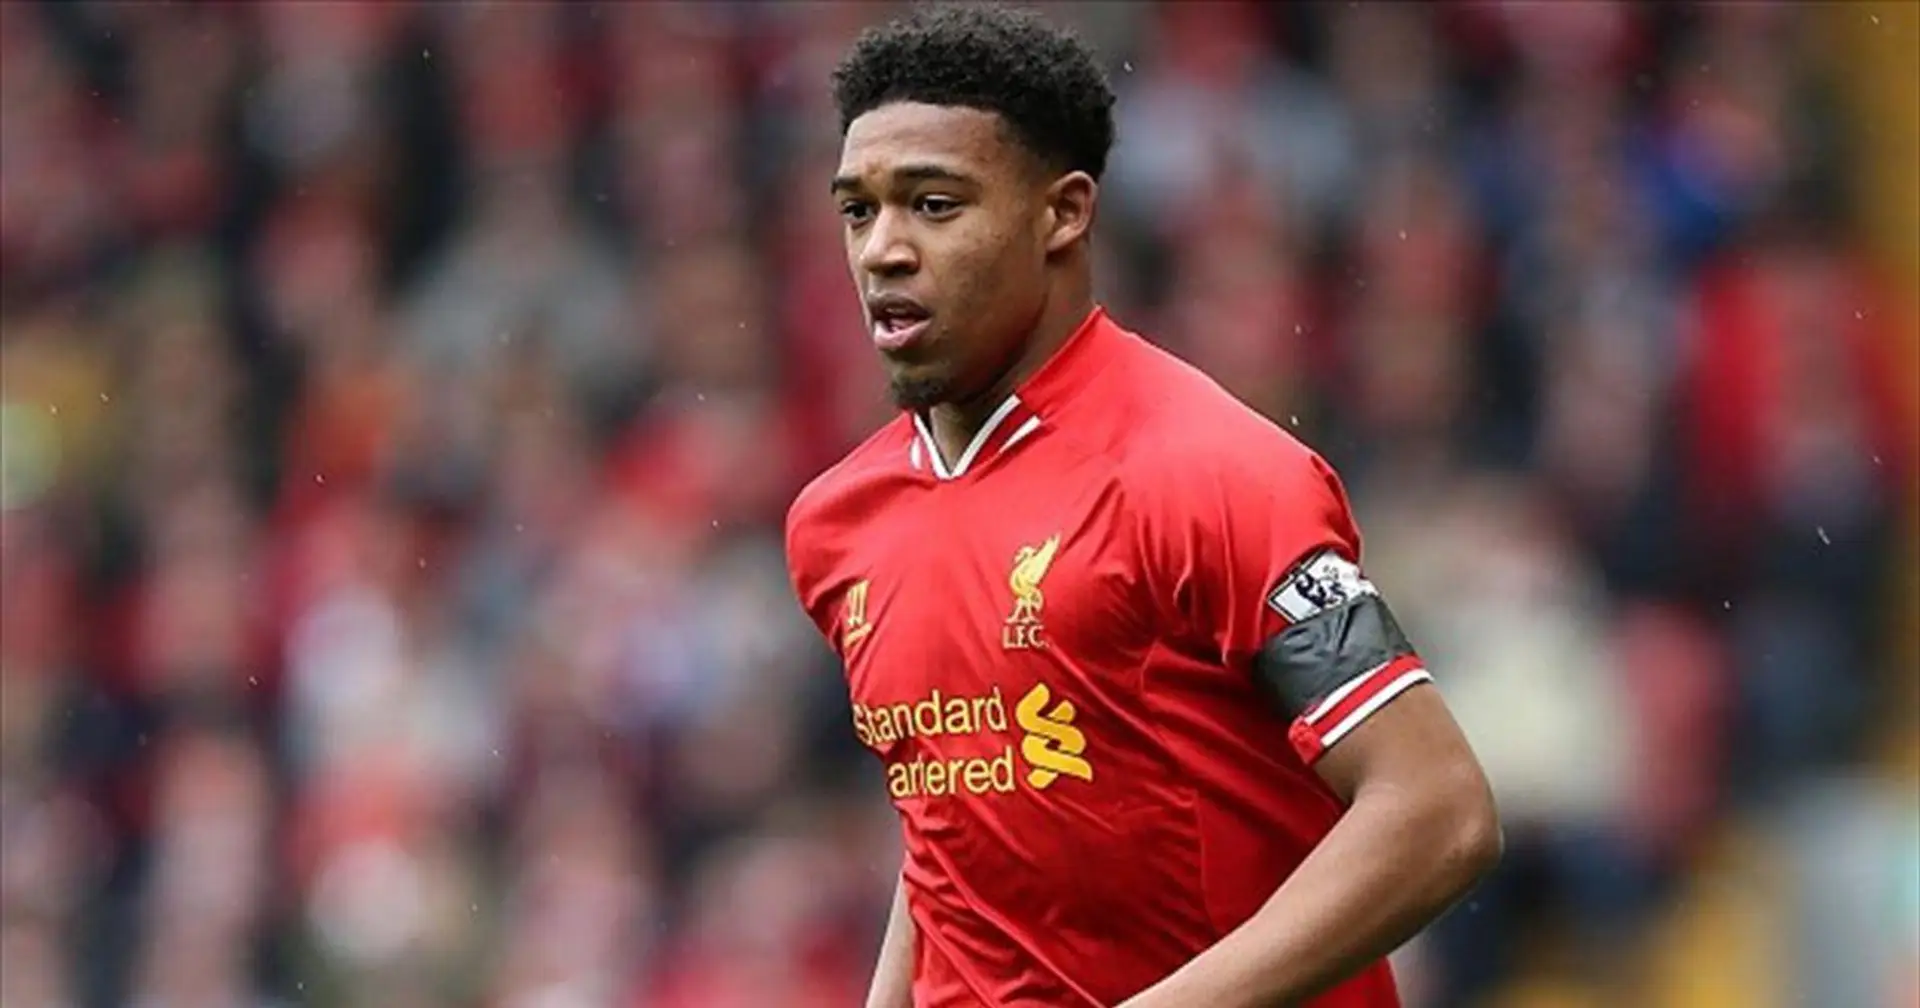 'I lost my passion for the game': Jordon Ibe delivers heartfelt message about his battle with depression